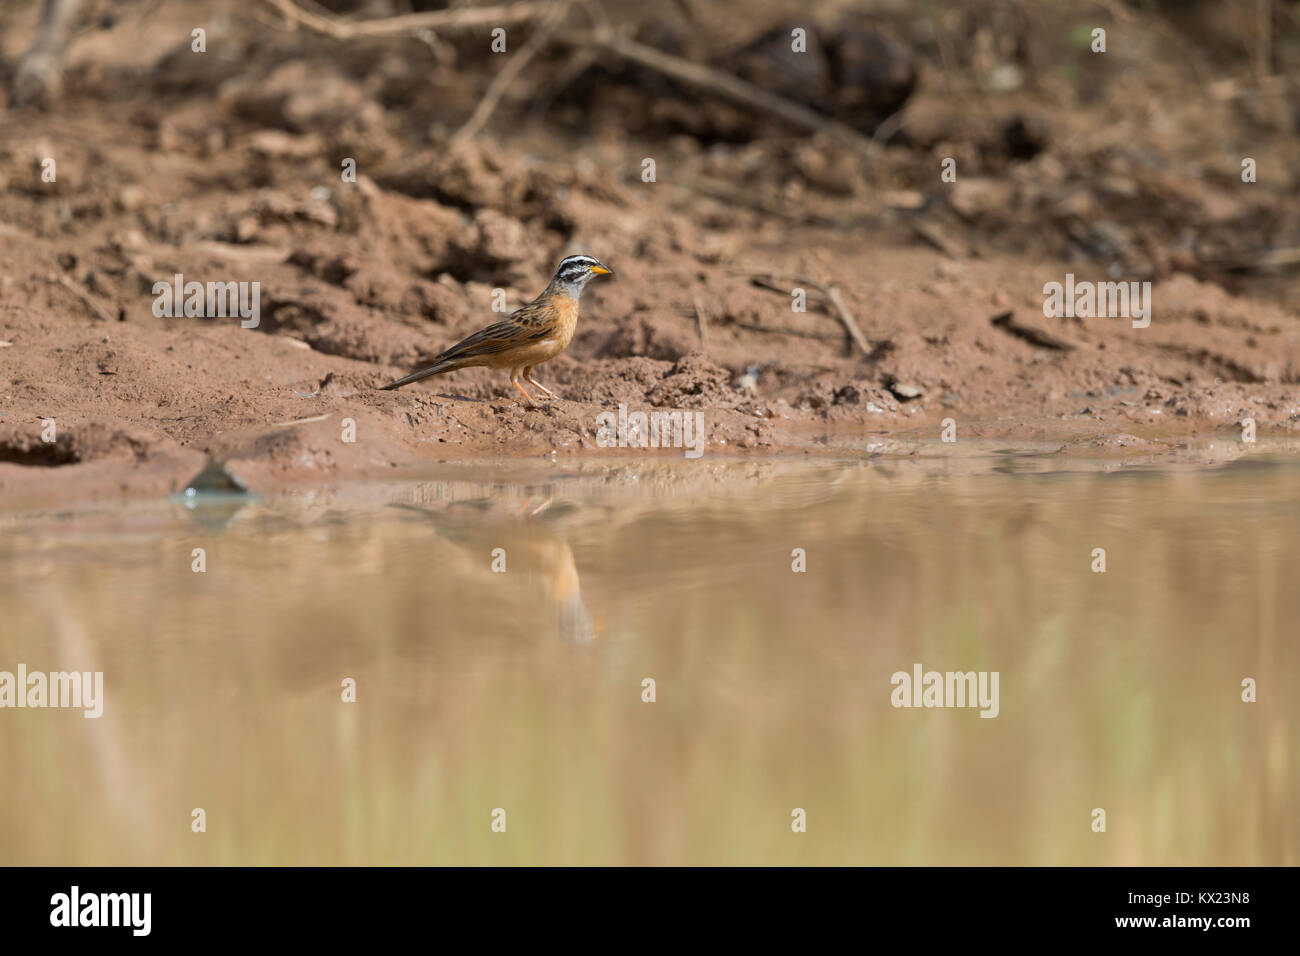 Cinnamon-breasted rock bunting Emberiza tahapisi, adult male, coming to drink at watering hole, Lower Saloum, The Gambia in November. Stock Photo